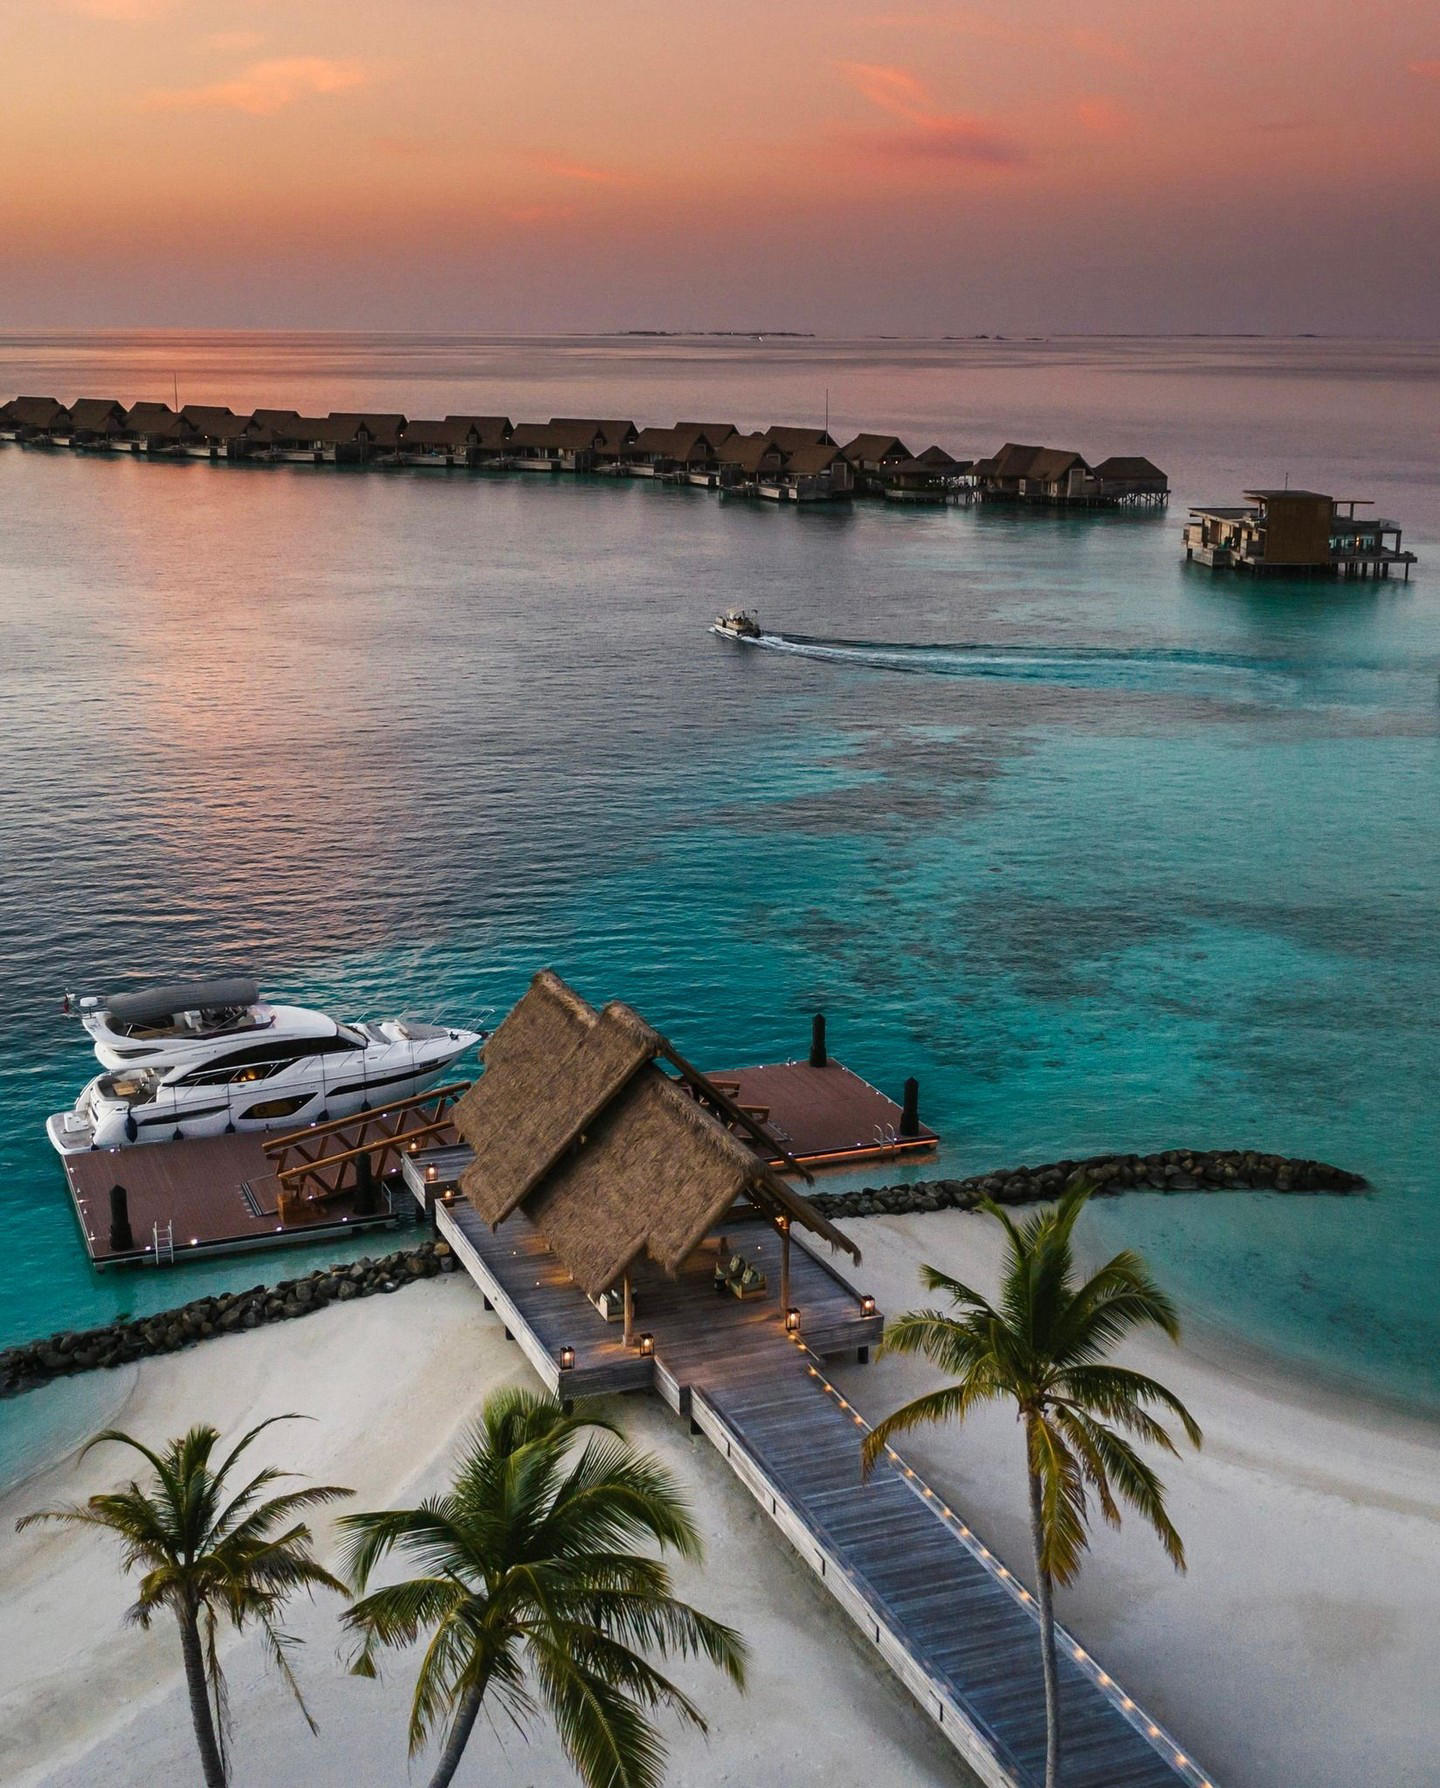 image  1 Waldorf Astoria Maldives - Nature’s beauty and luxurious living are married together in one heavenly